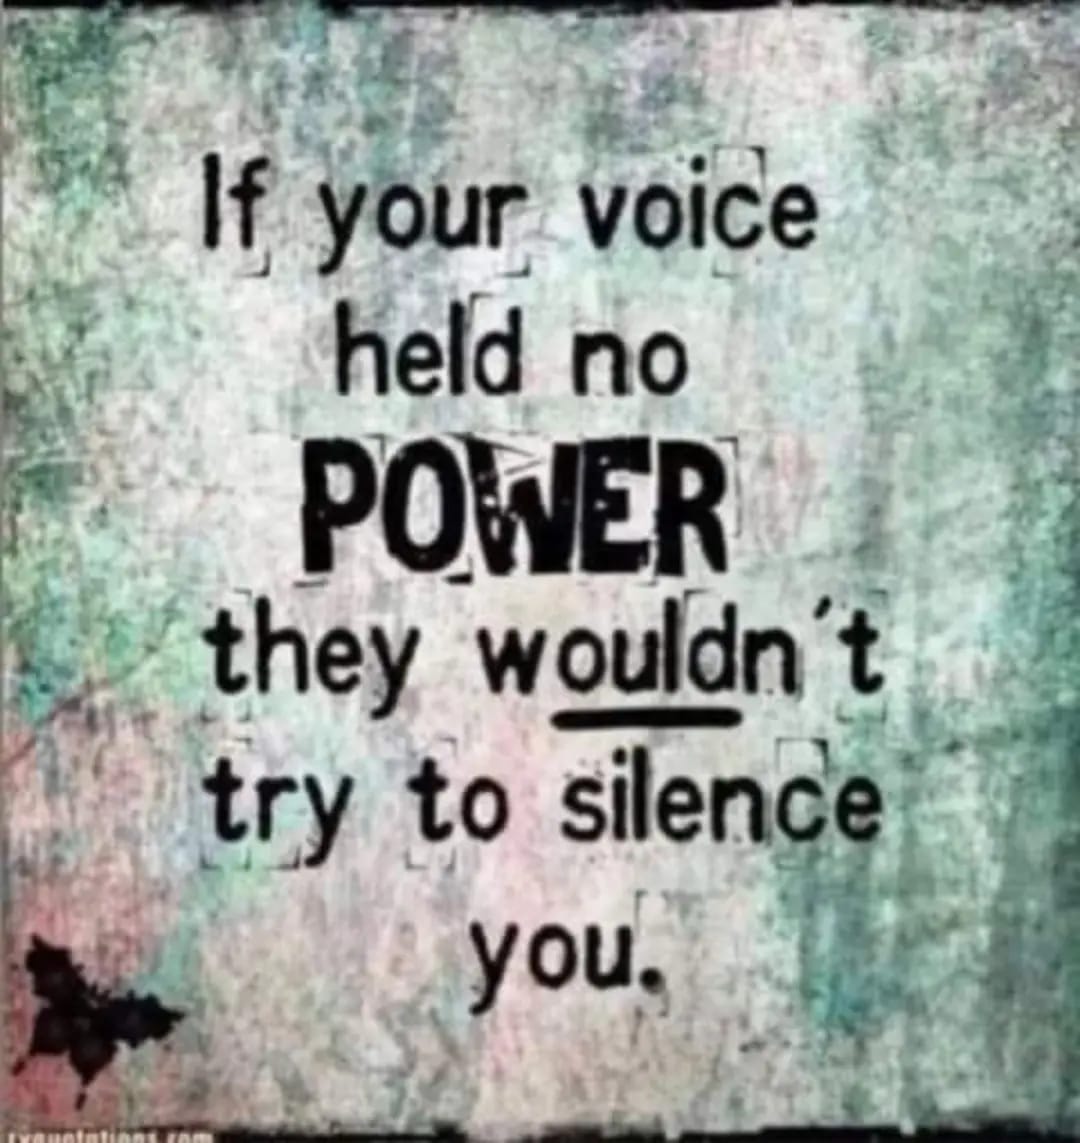 May be an image of text that says "If your voice held no POWER they wouldn't try to silence you,"